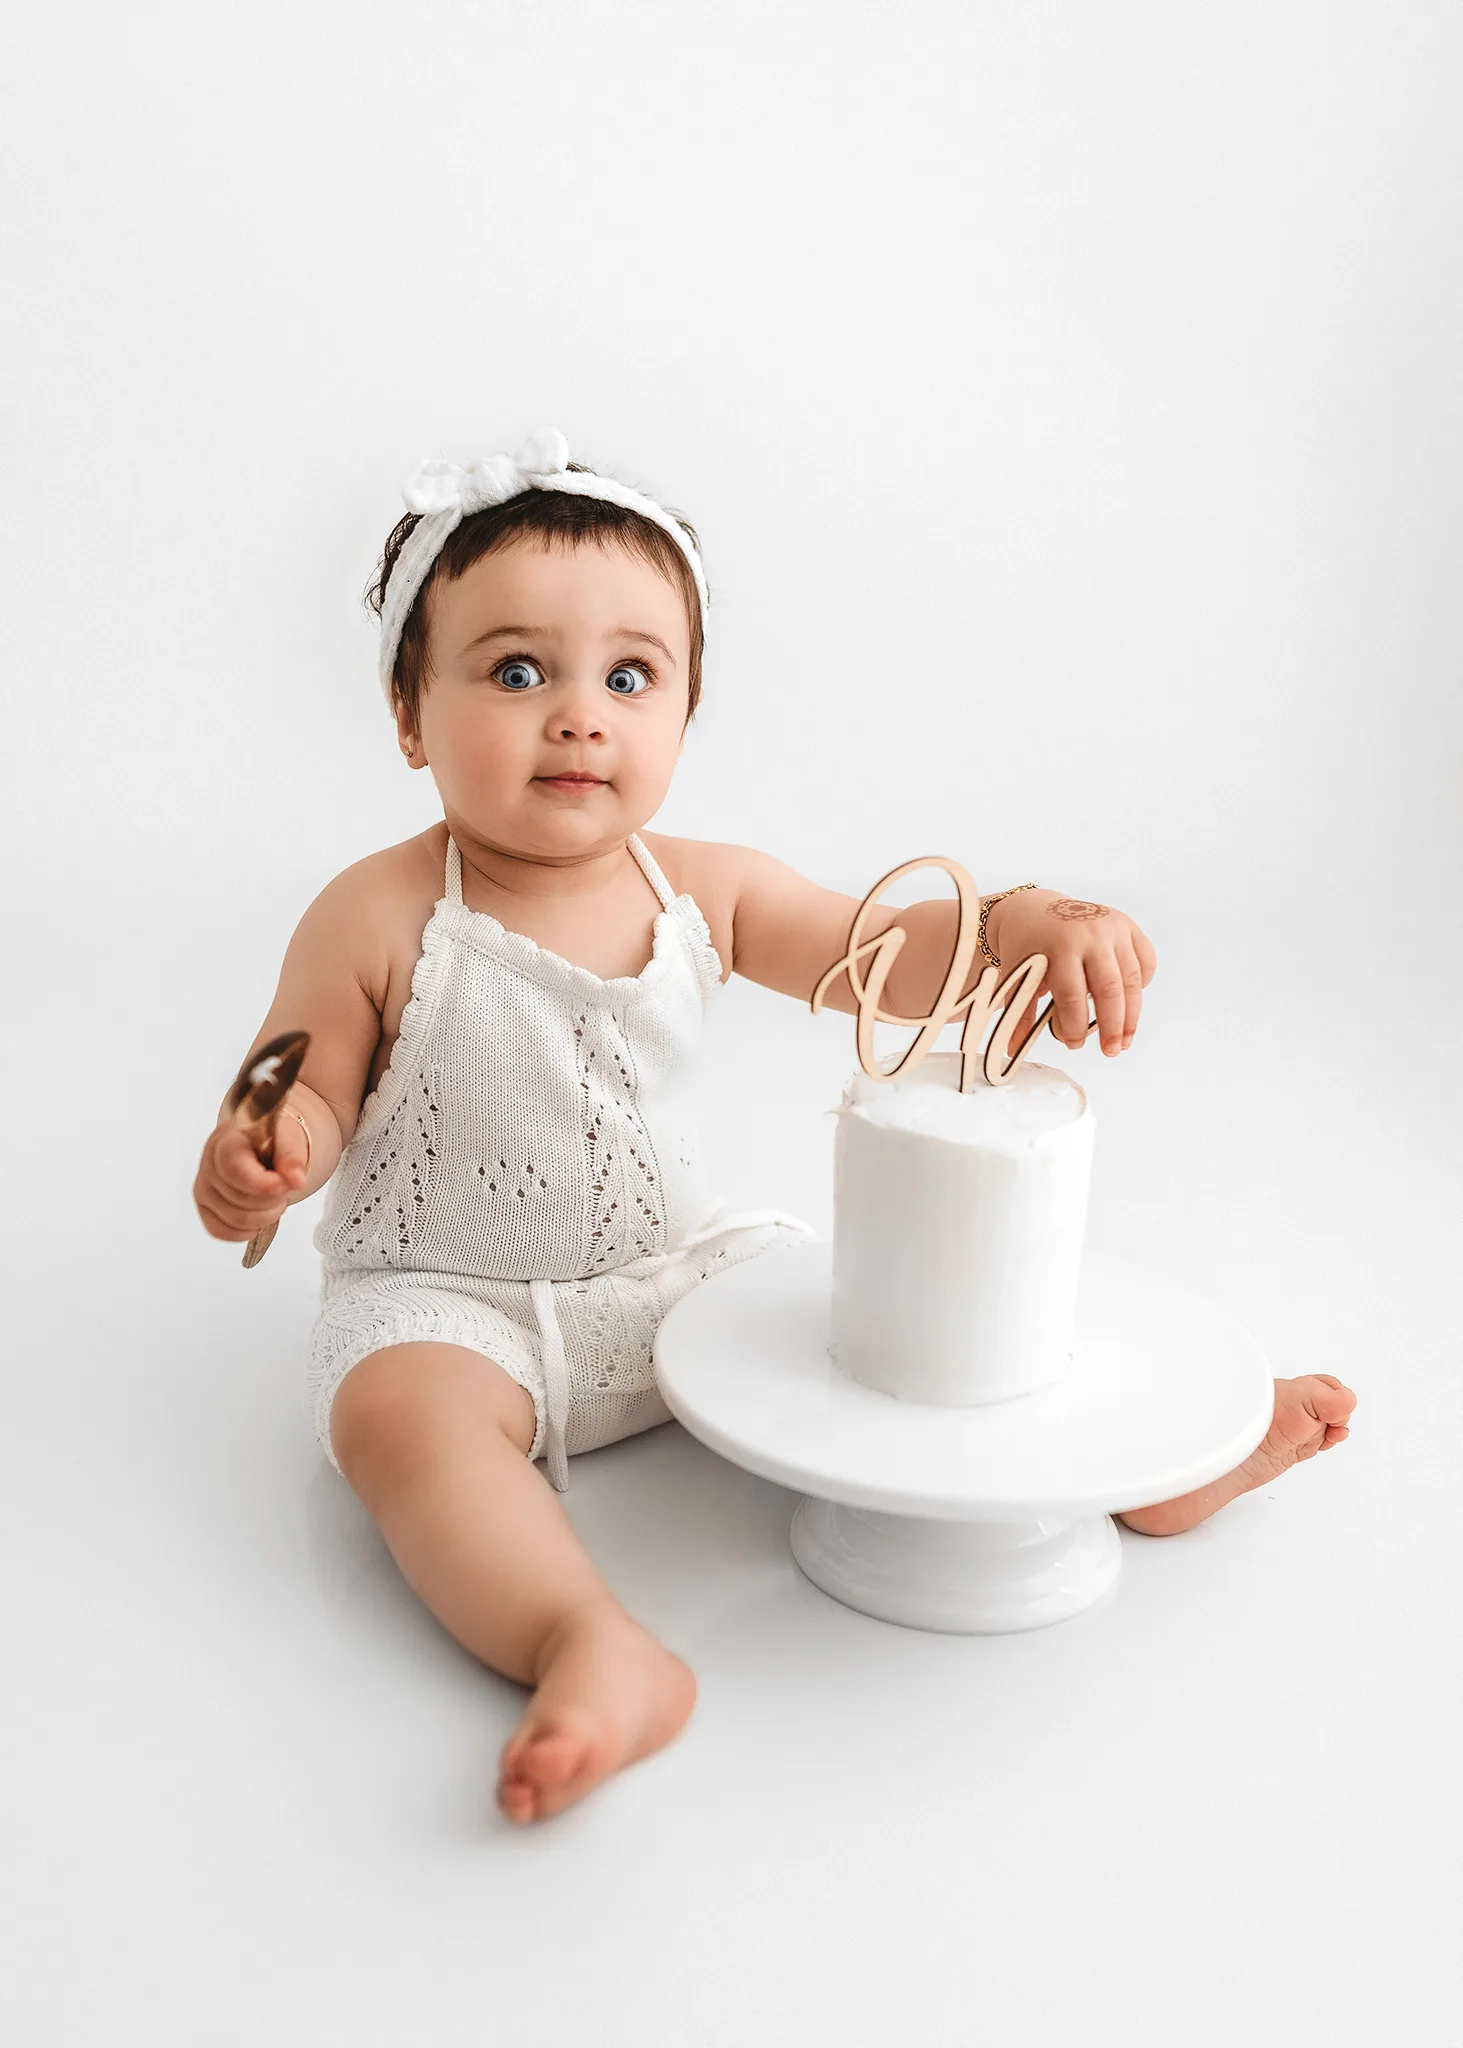 baby girl celebrating her first birthday eating cake, Cake smash photography, simple and clean cake smash photoshoot, first birthday photoshoot lincoln nebraska, omaha birthday photoshoot